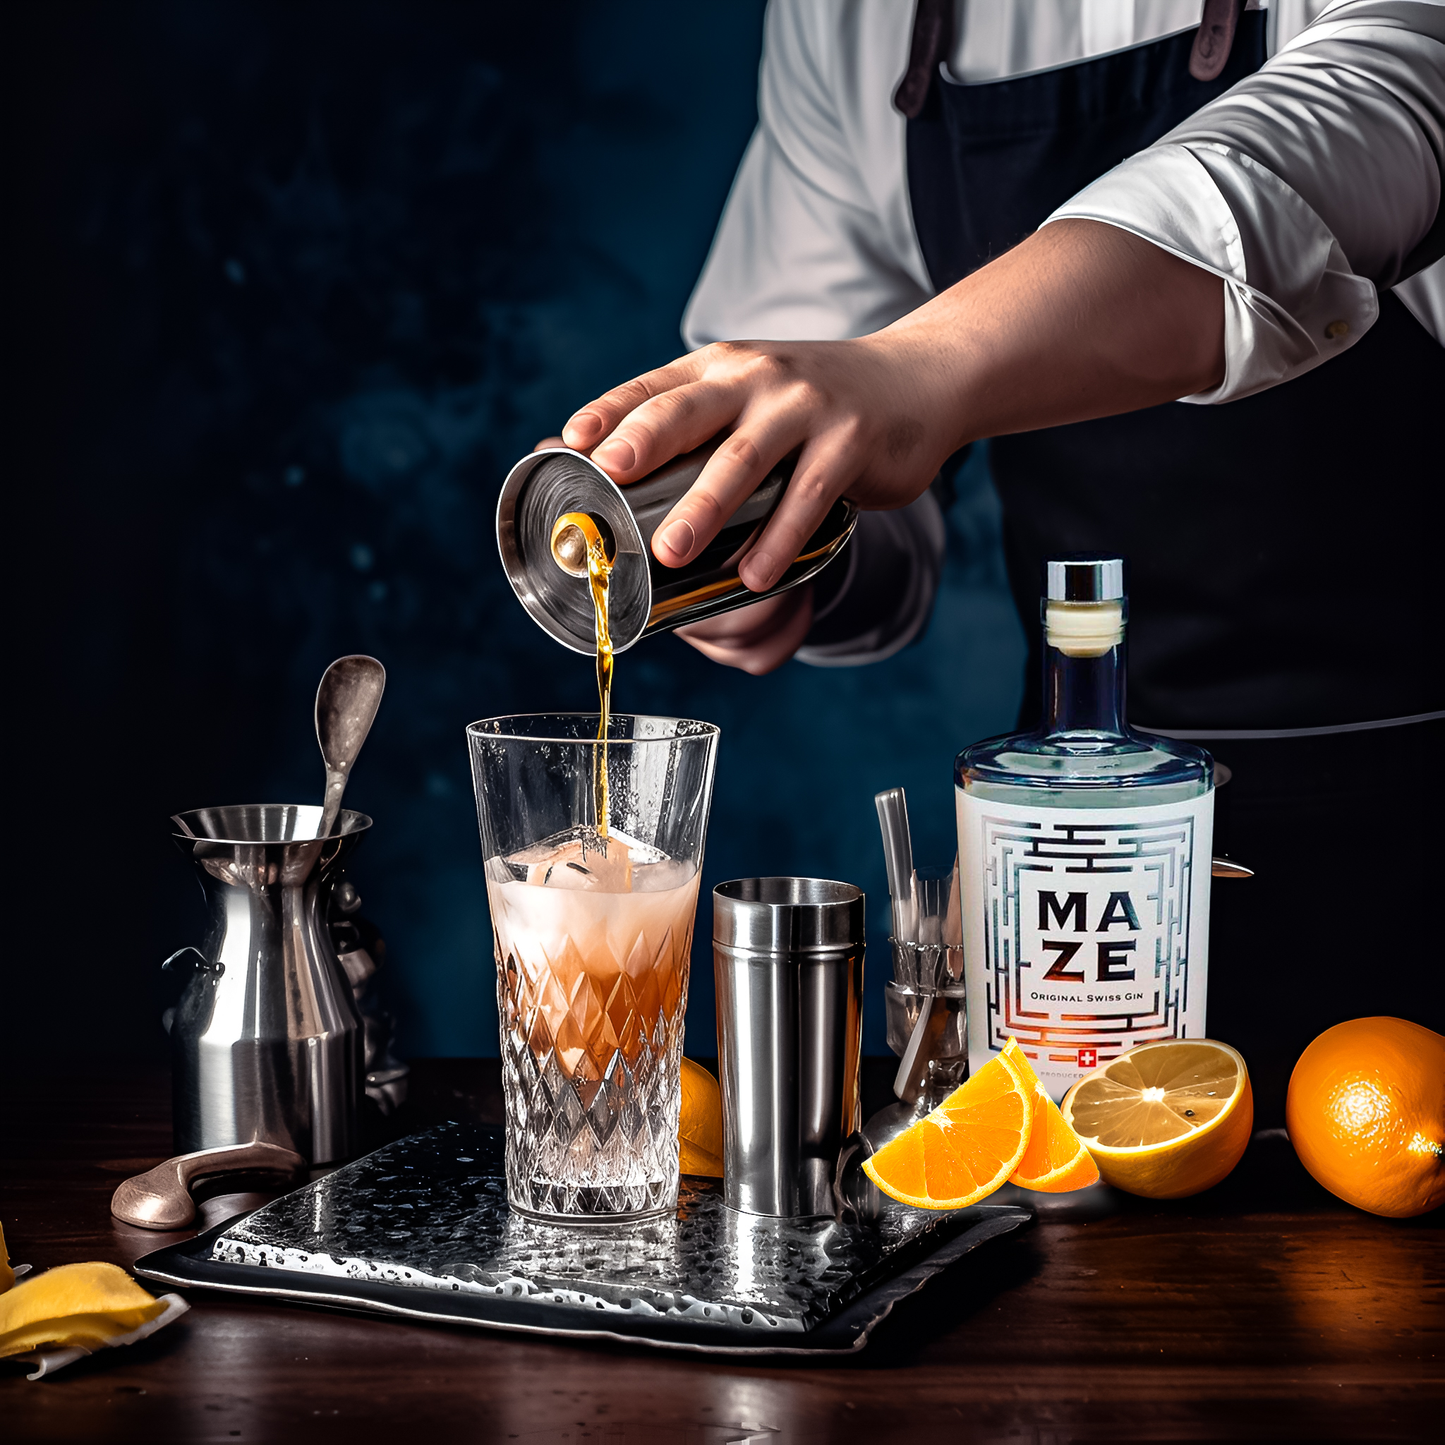 MAZE Handcrafted Dry Gin